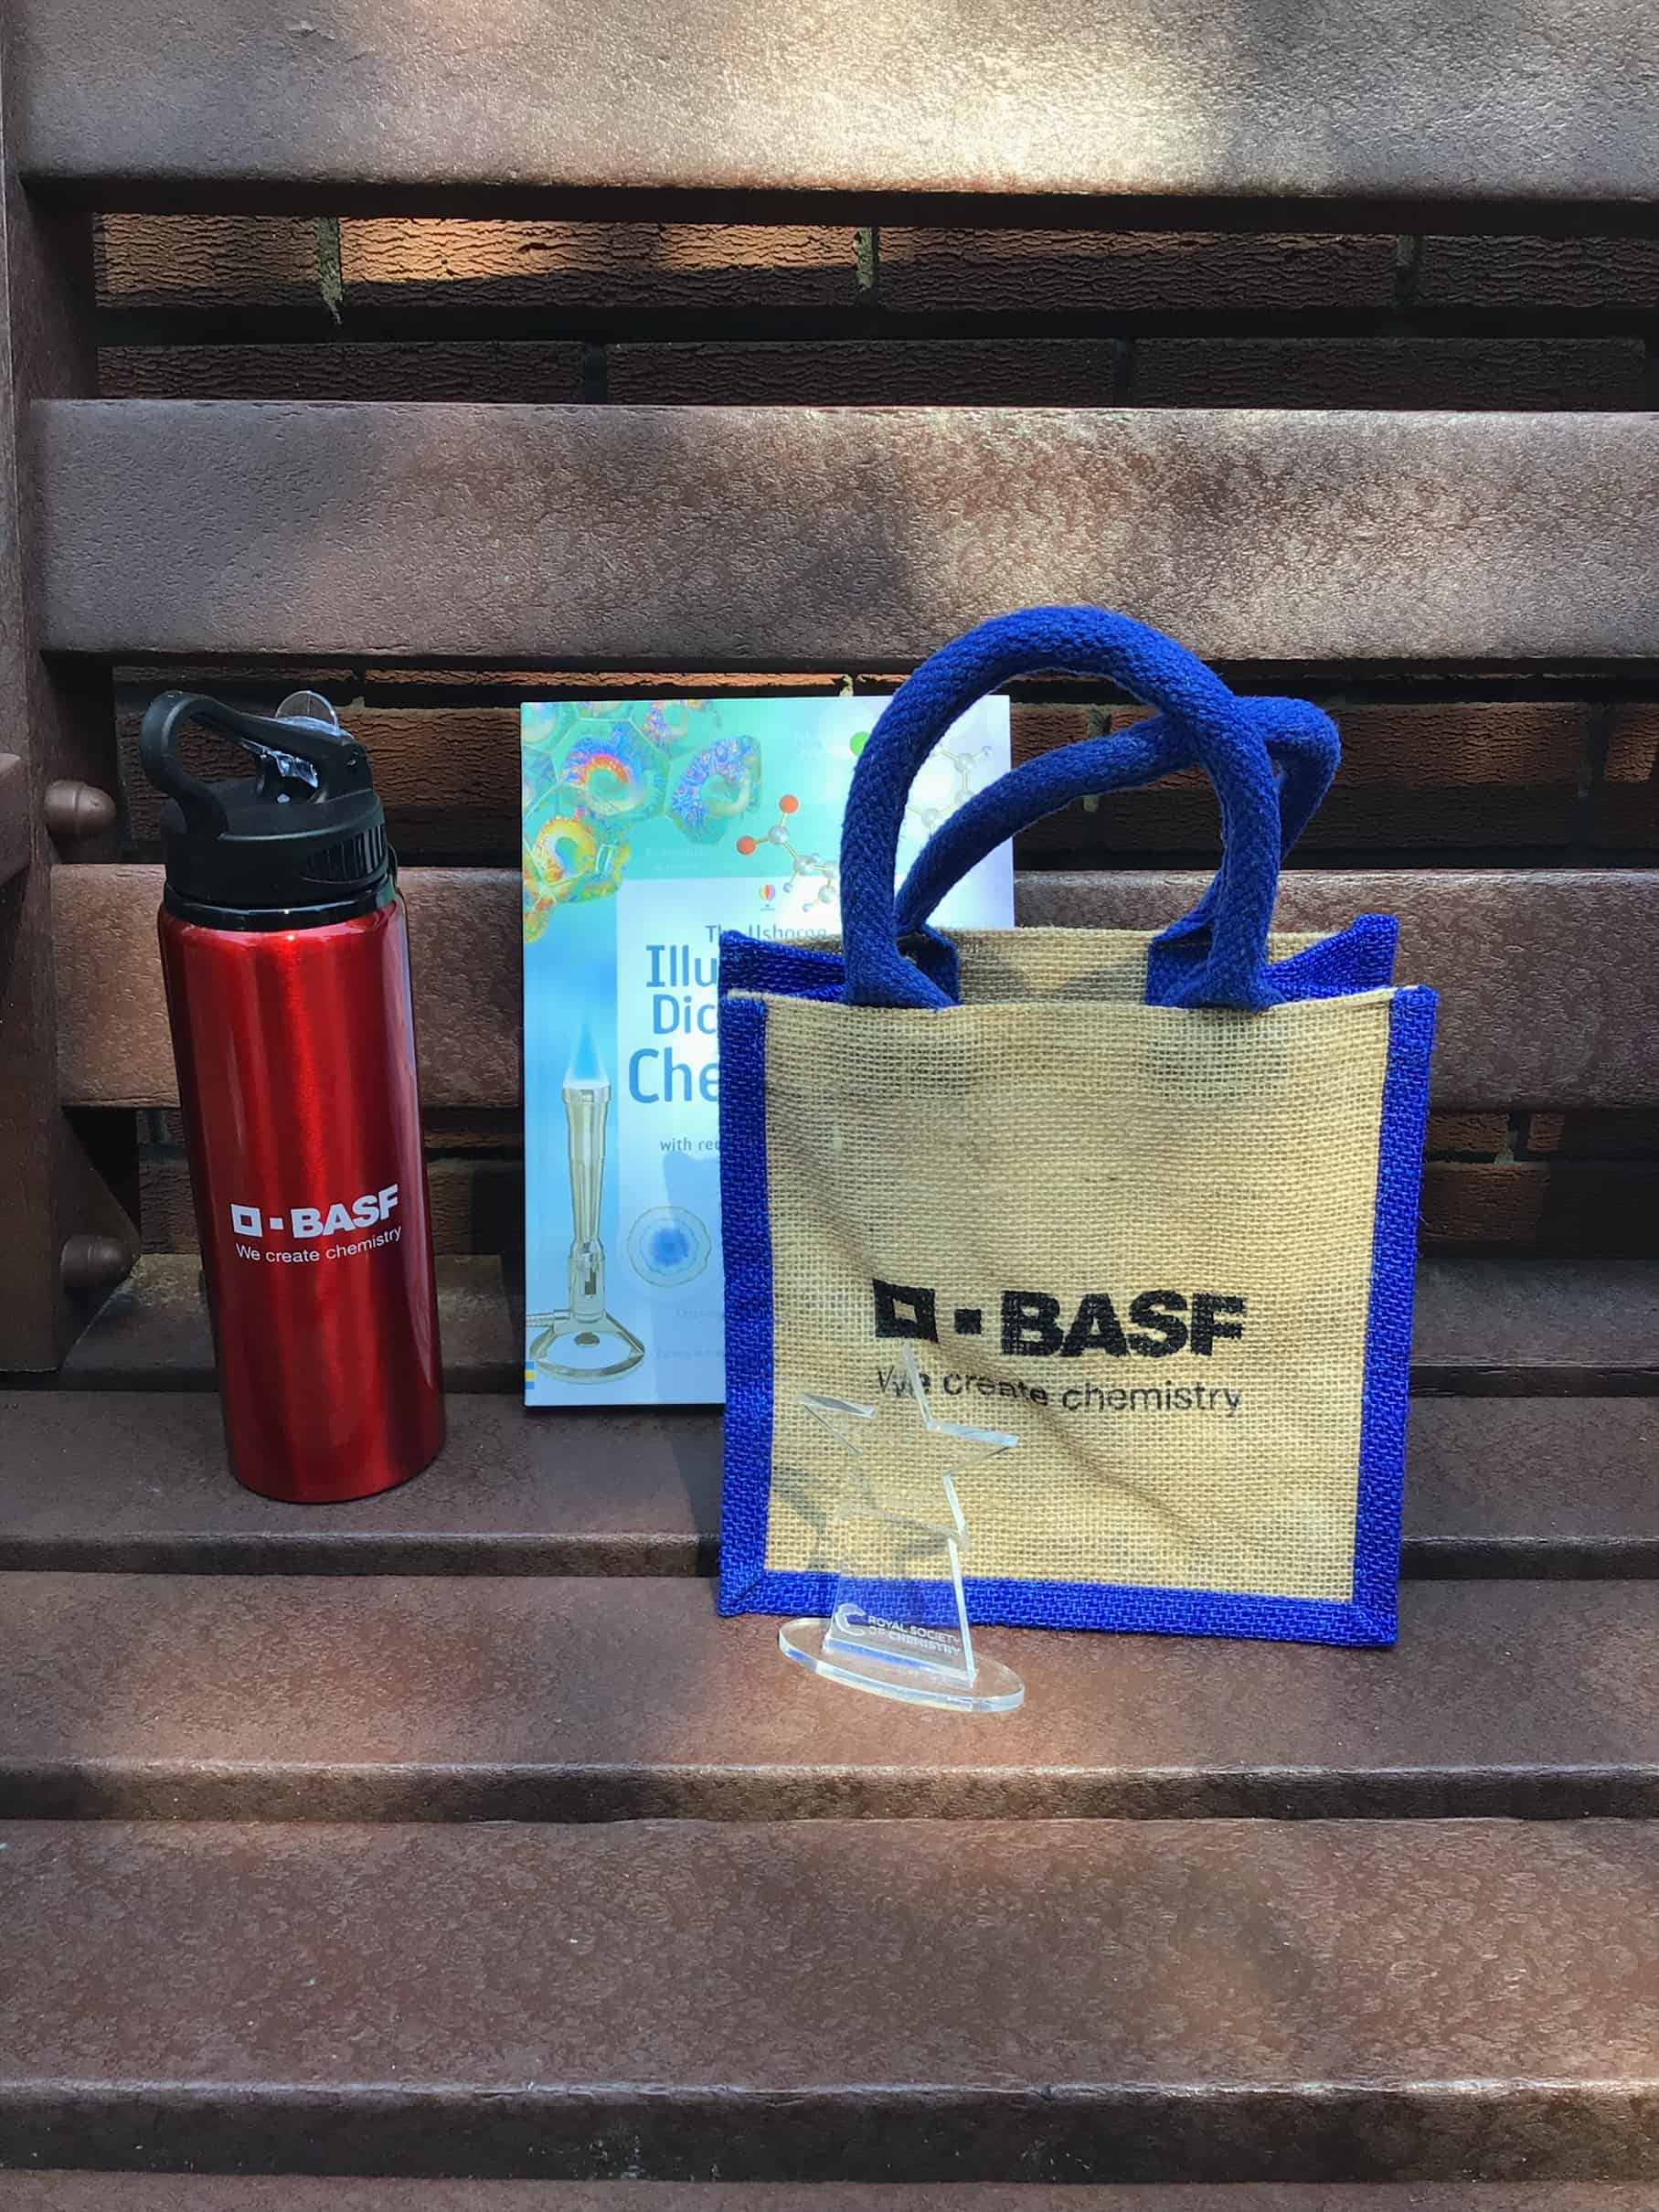 The items received by the Cheadle Hulme High School students who competed in the Chemquiz. These are: A BASF red water bottle, a book about Chemistry, a BASF tote bag, and a Royal Society of Chemistry trophy.